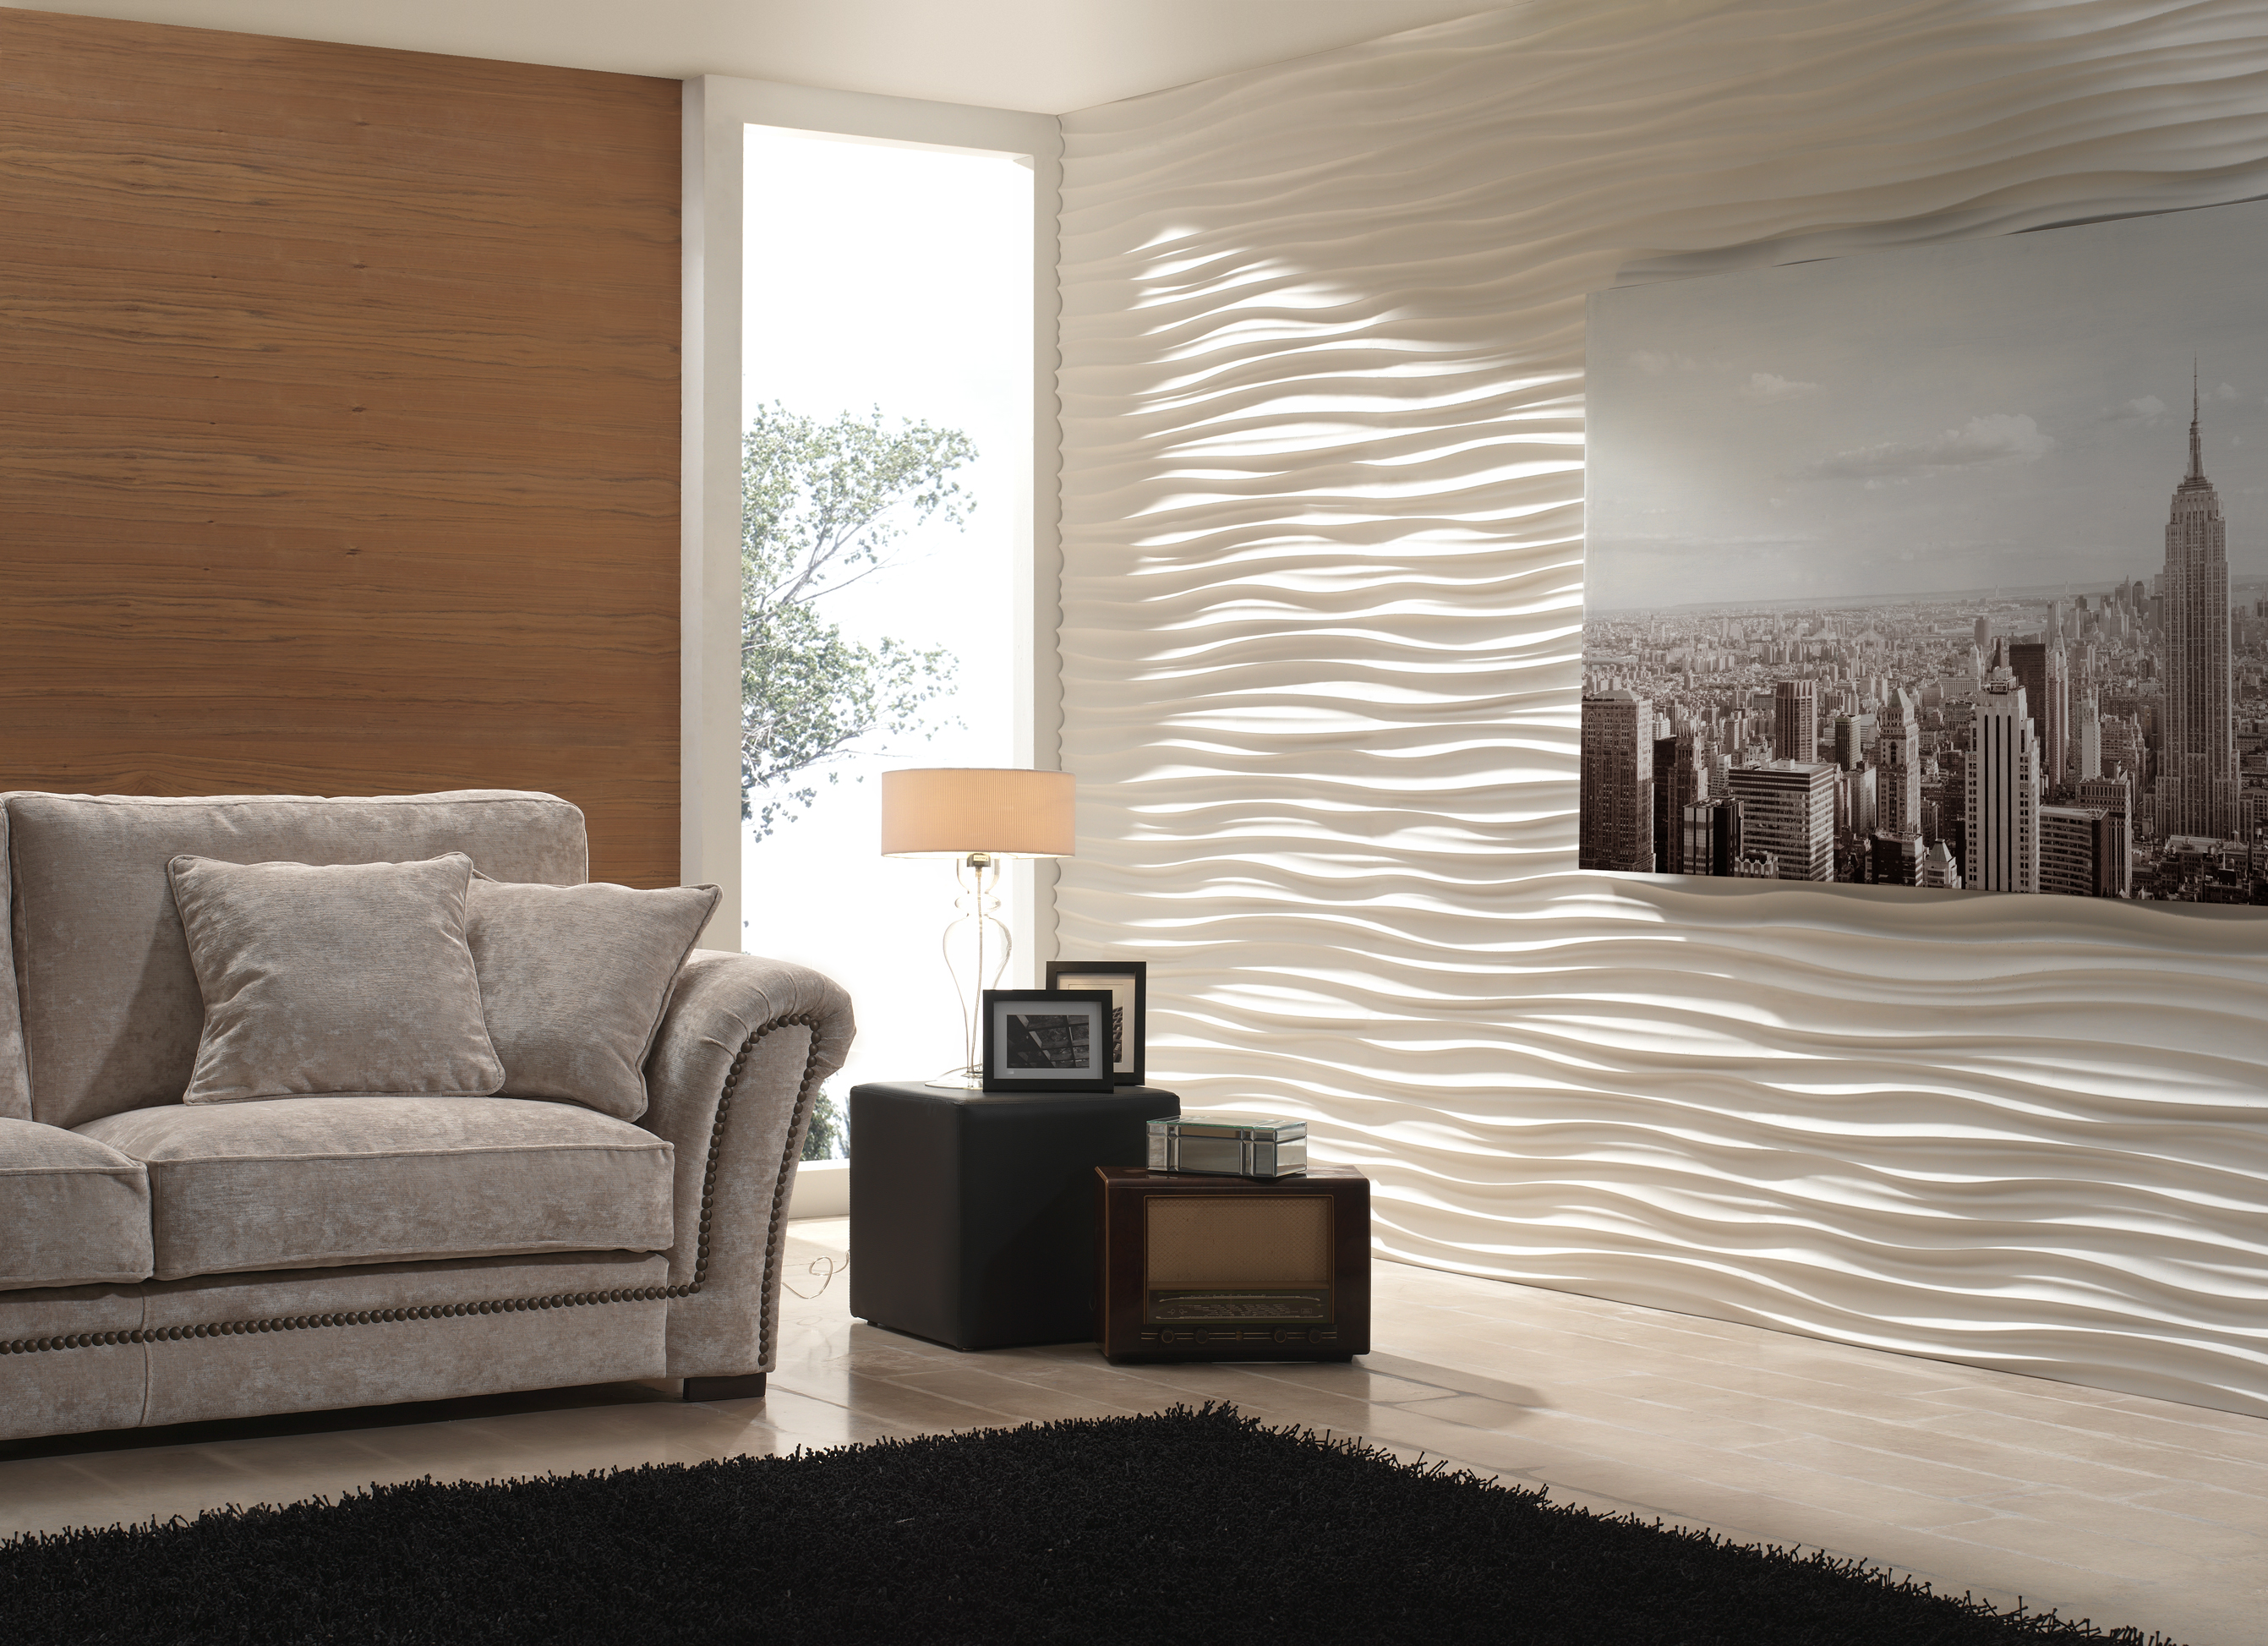 NEW Dreamwall Range of Panels 'LIFESTYLE' Collection – Dreamwall ...